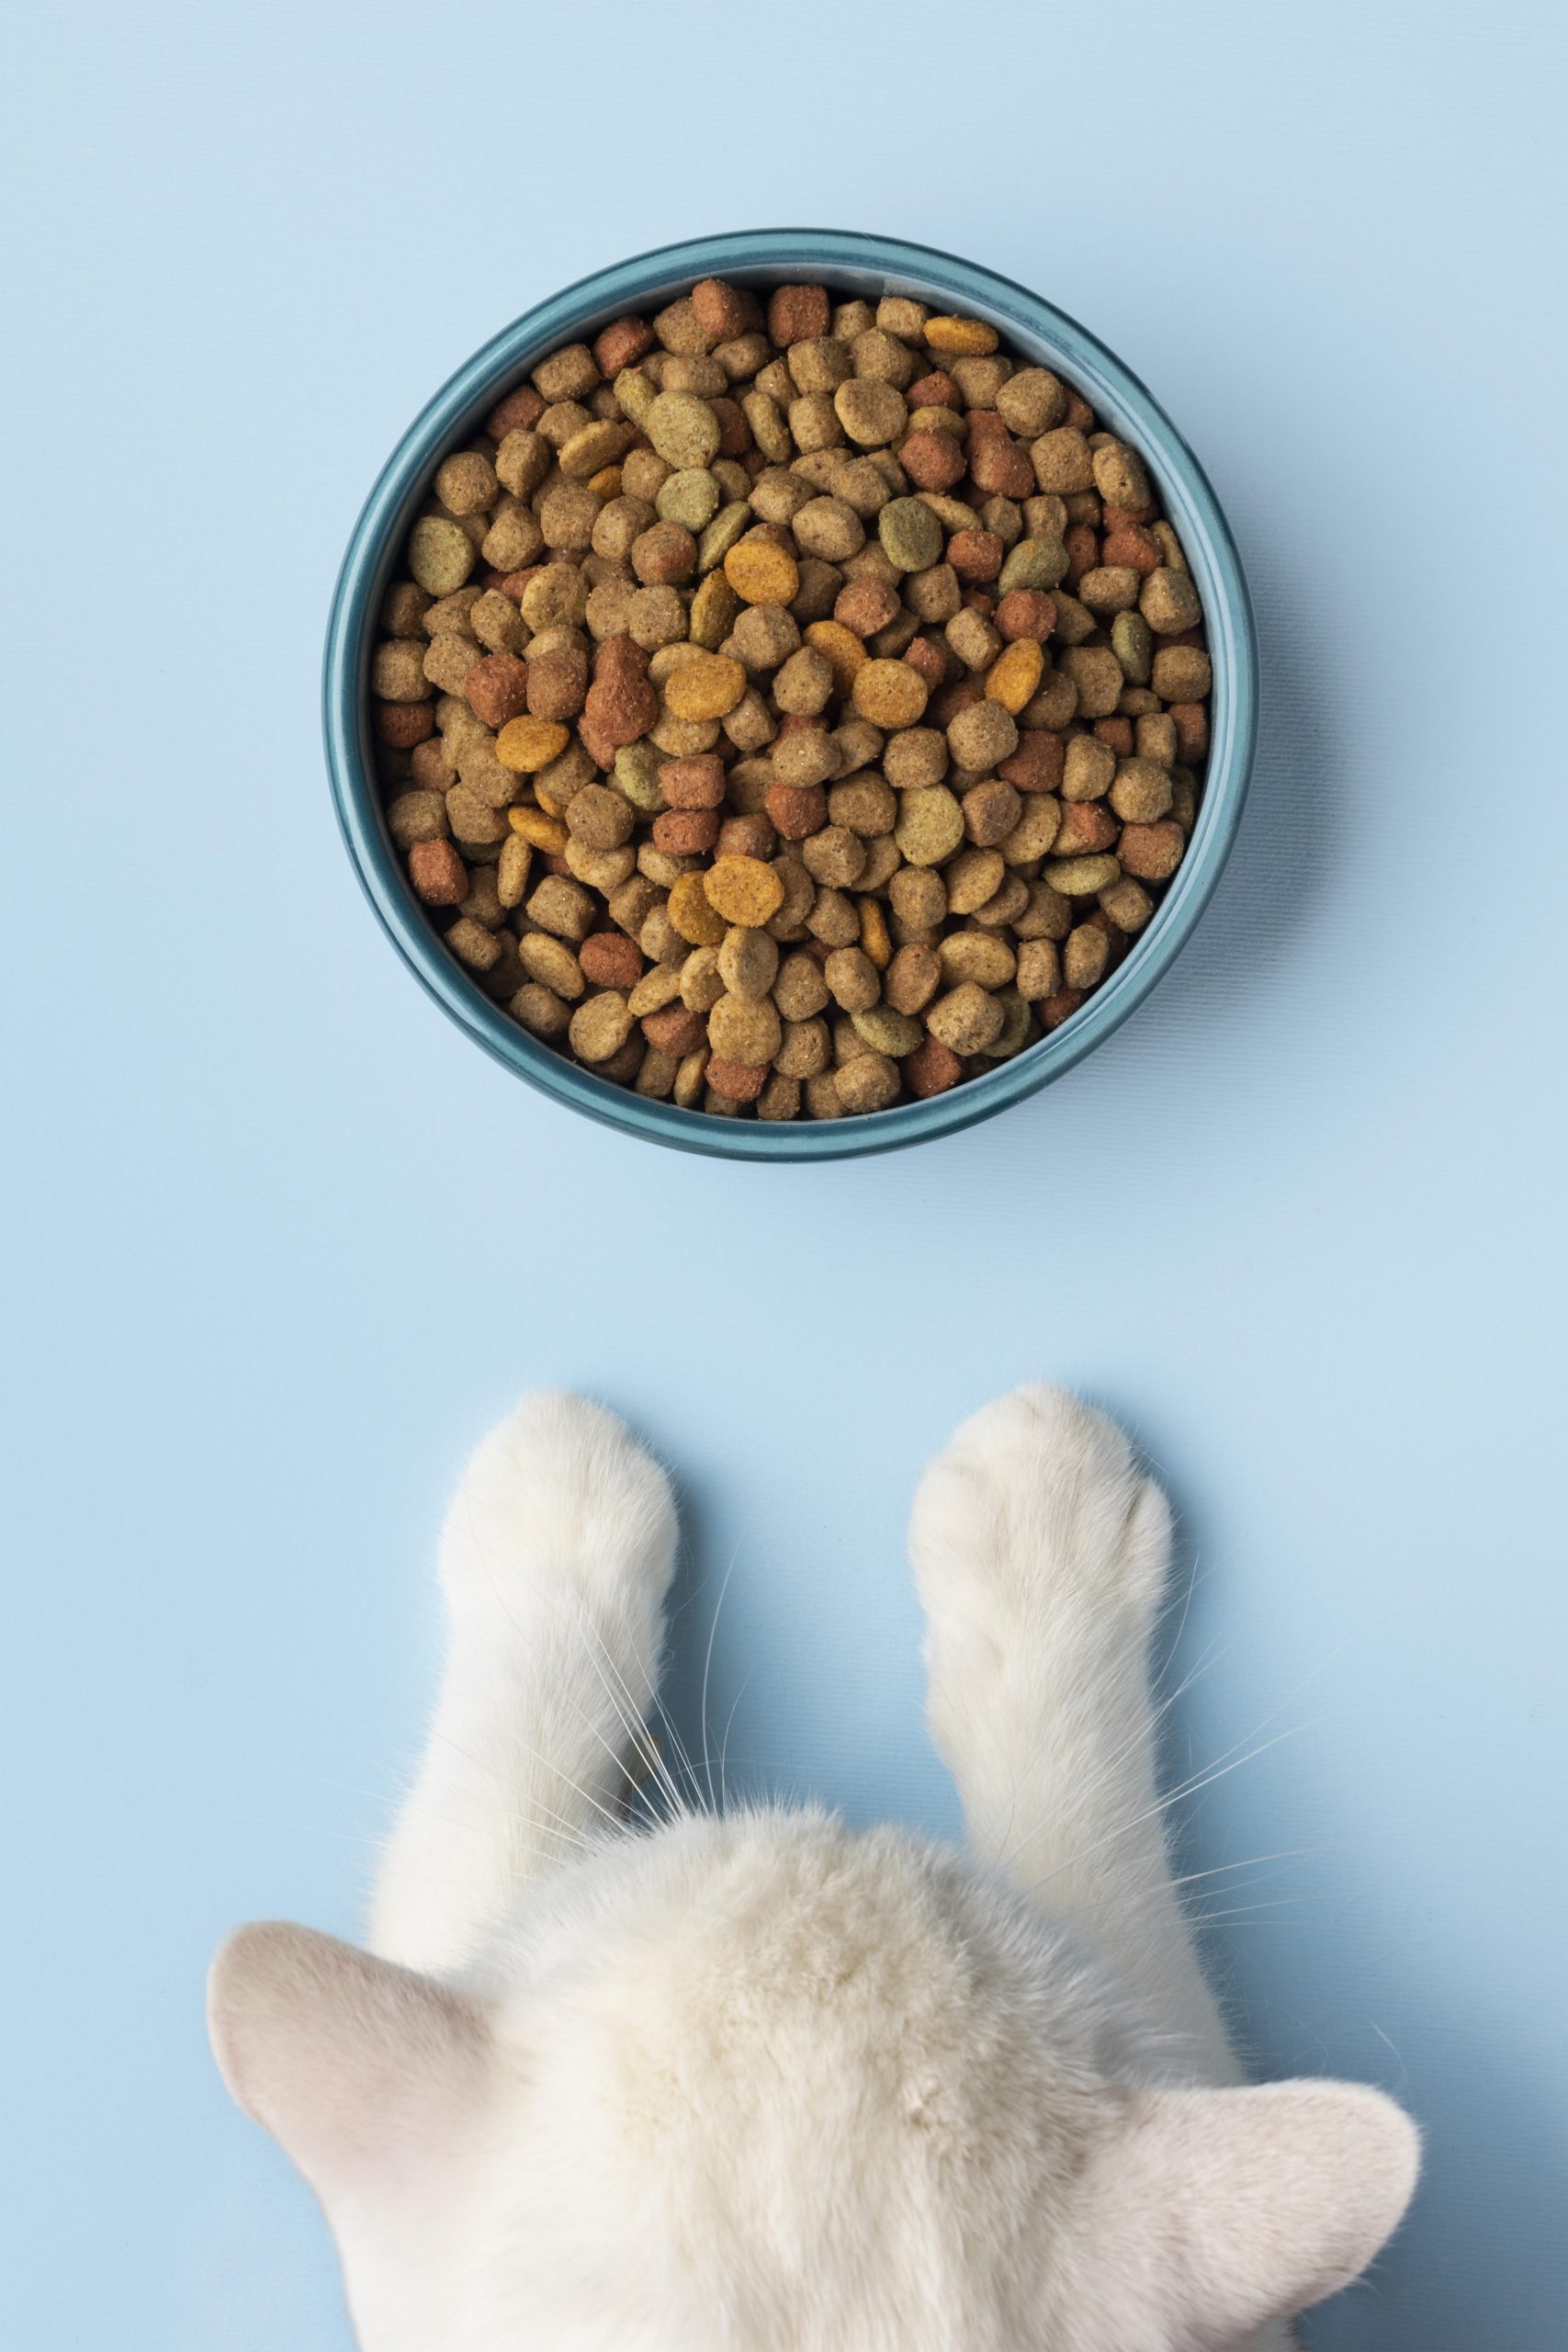 Cat Food Vs. Kitten Food: What's The Difference?